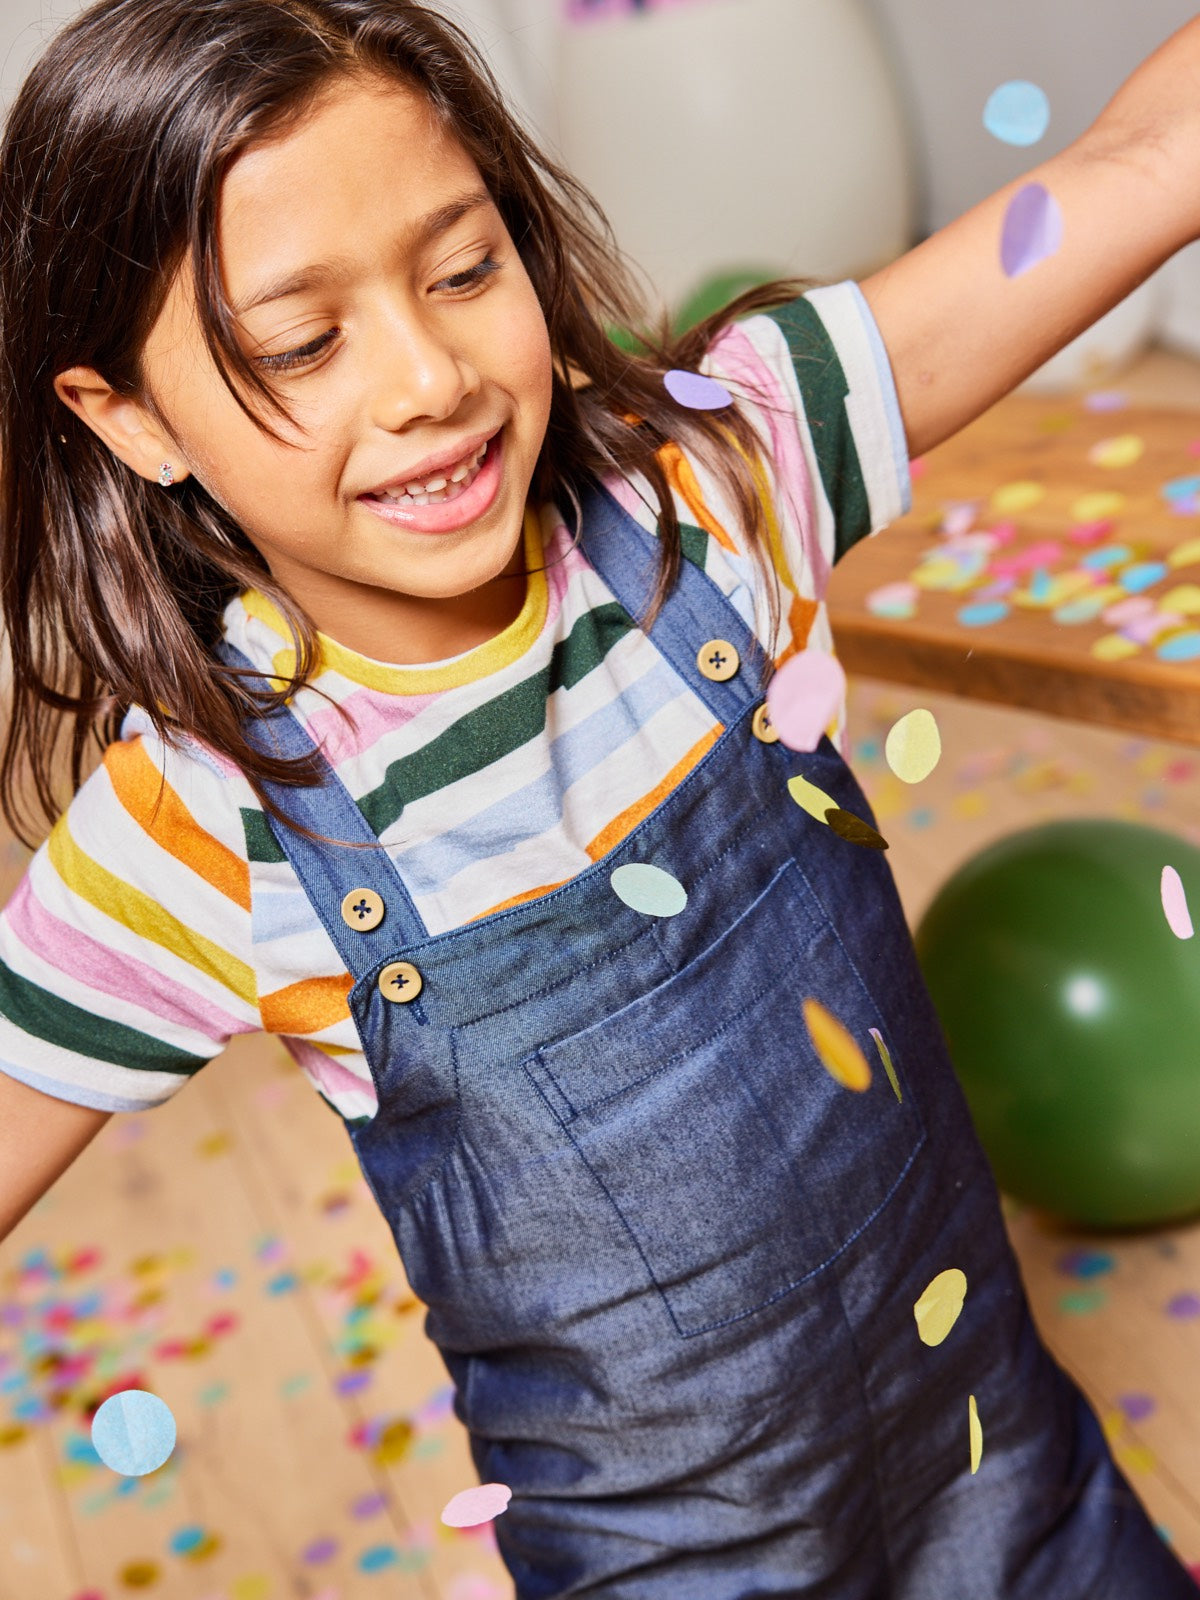 A child wearing the Sofia eco-friendly kids dungarees, pictured with falling confetti and balloons.